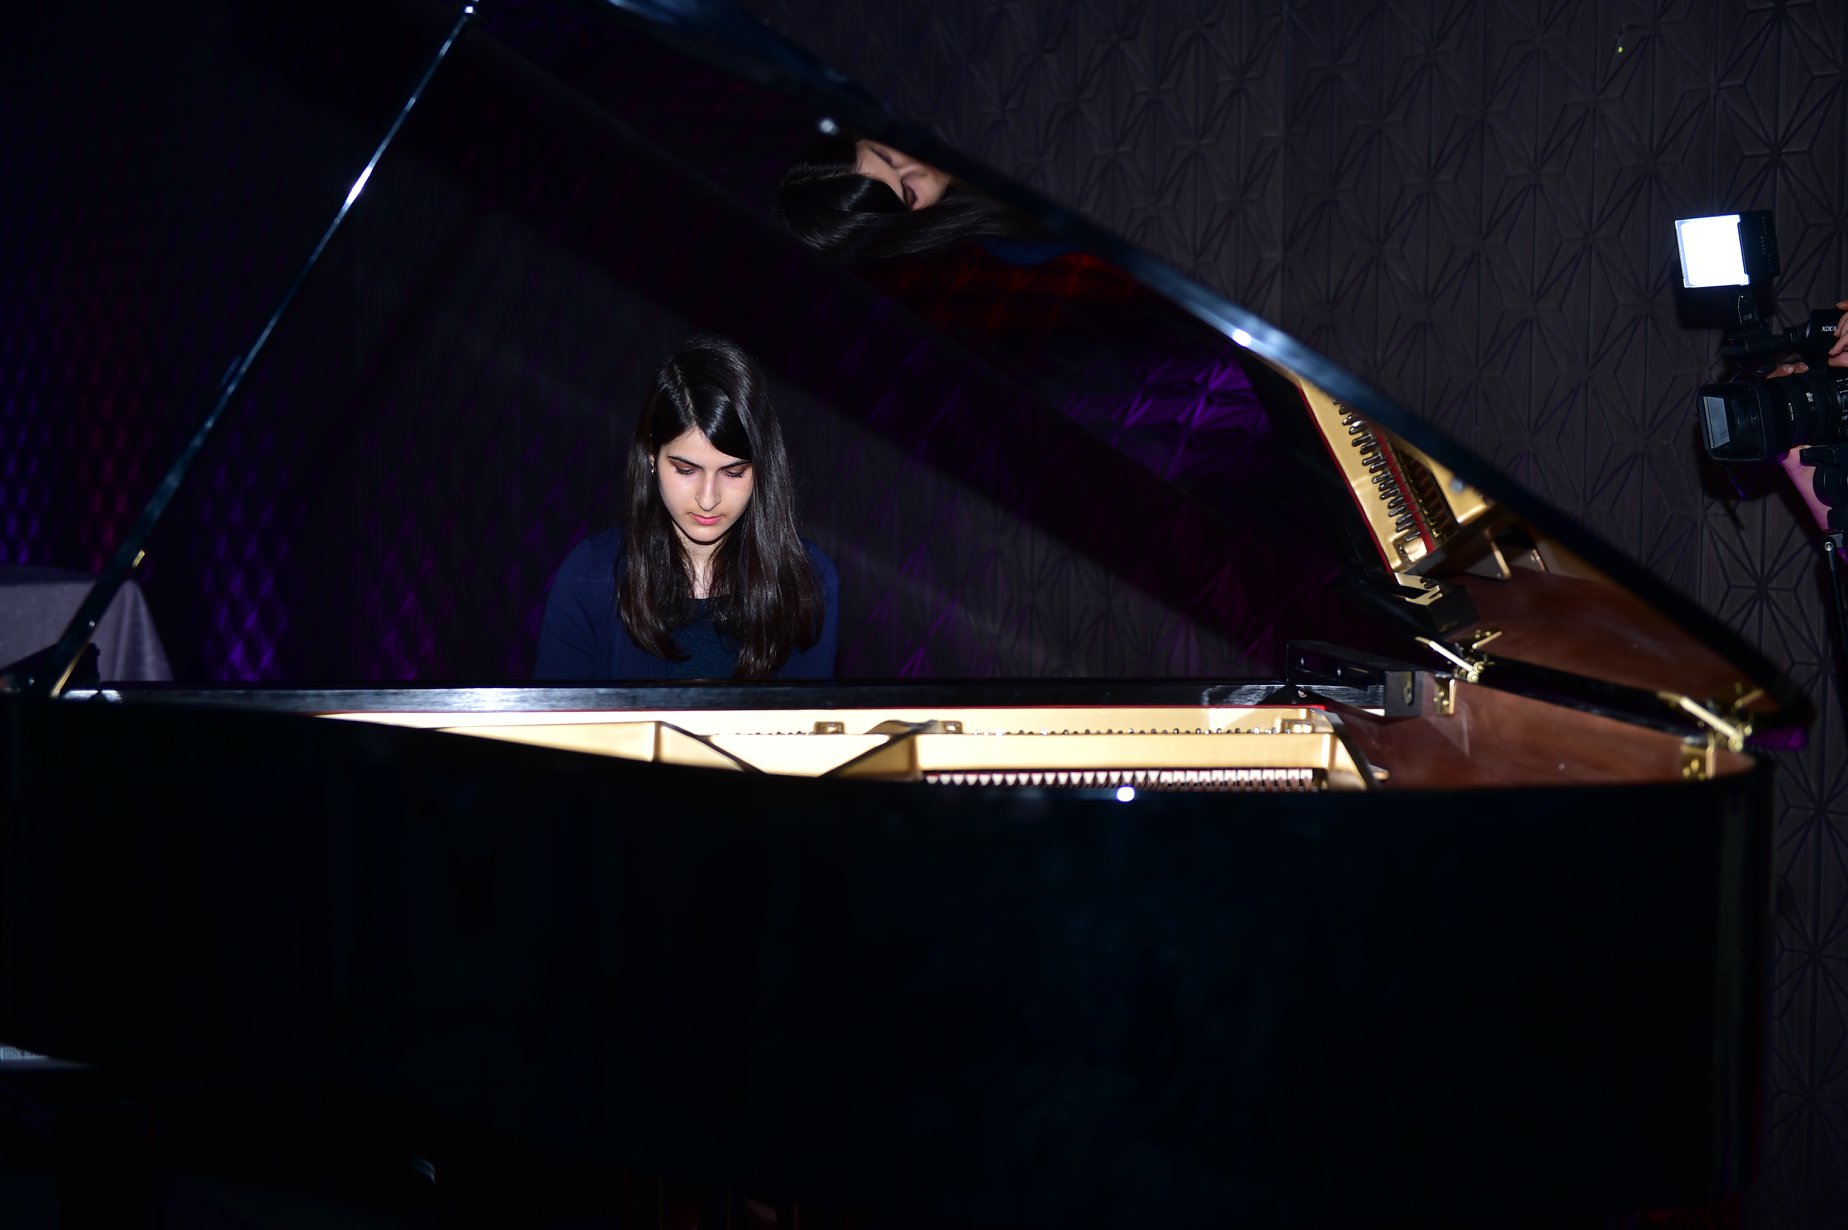 Lulwa Al Shamlan, Year 12 student and one of the youngest Inspiring Kuwaitis in our book, playing the Appassionata sonata, 3rd movement by Beethoven on the piano at the launch of Those Who Inspire Kuwait ©Those Who Inspire